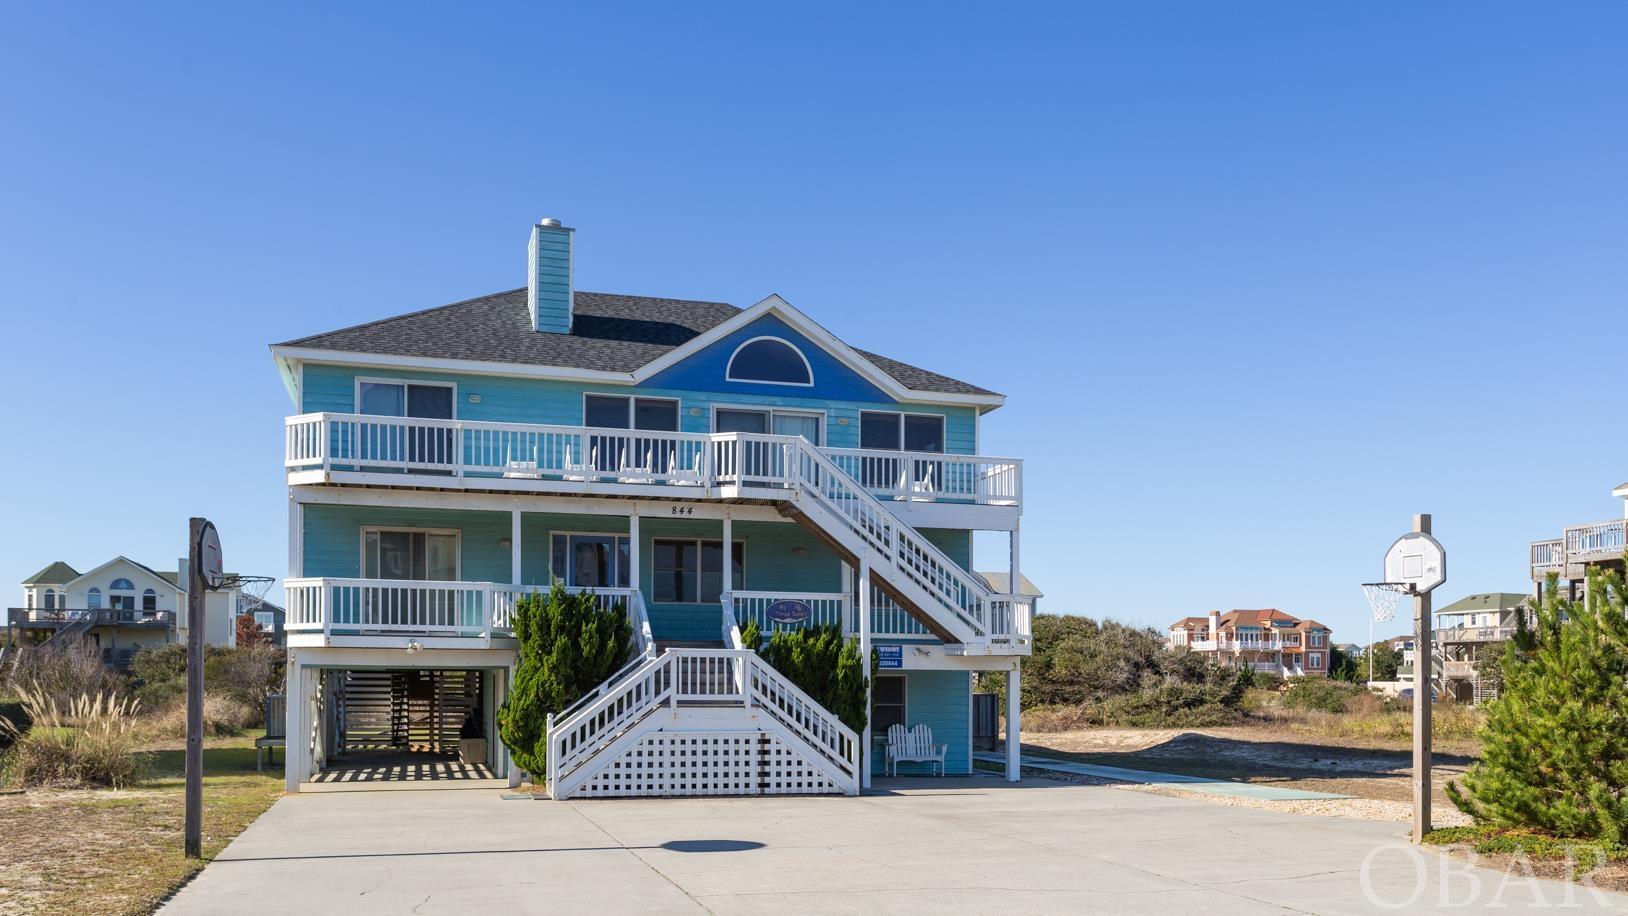 Corolla, North Carolina 27927, 6 Bedrooms Bedrooms, ,5 BathroomsBathrooms,Single family - detached,For sale,Lighthouse Drive,117380